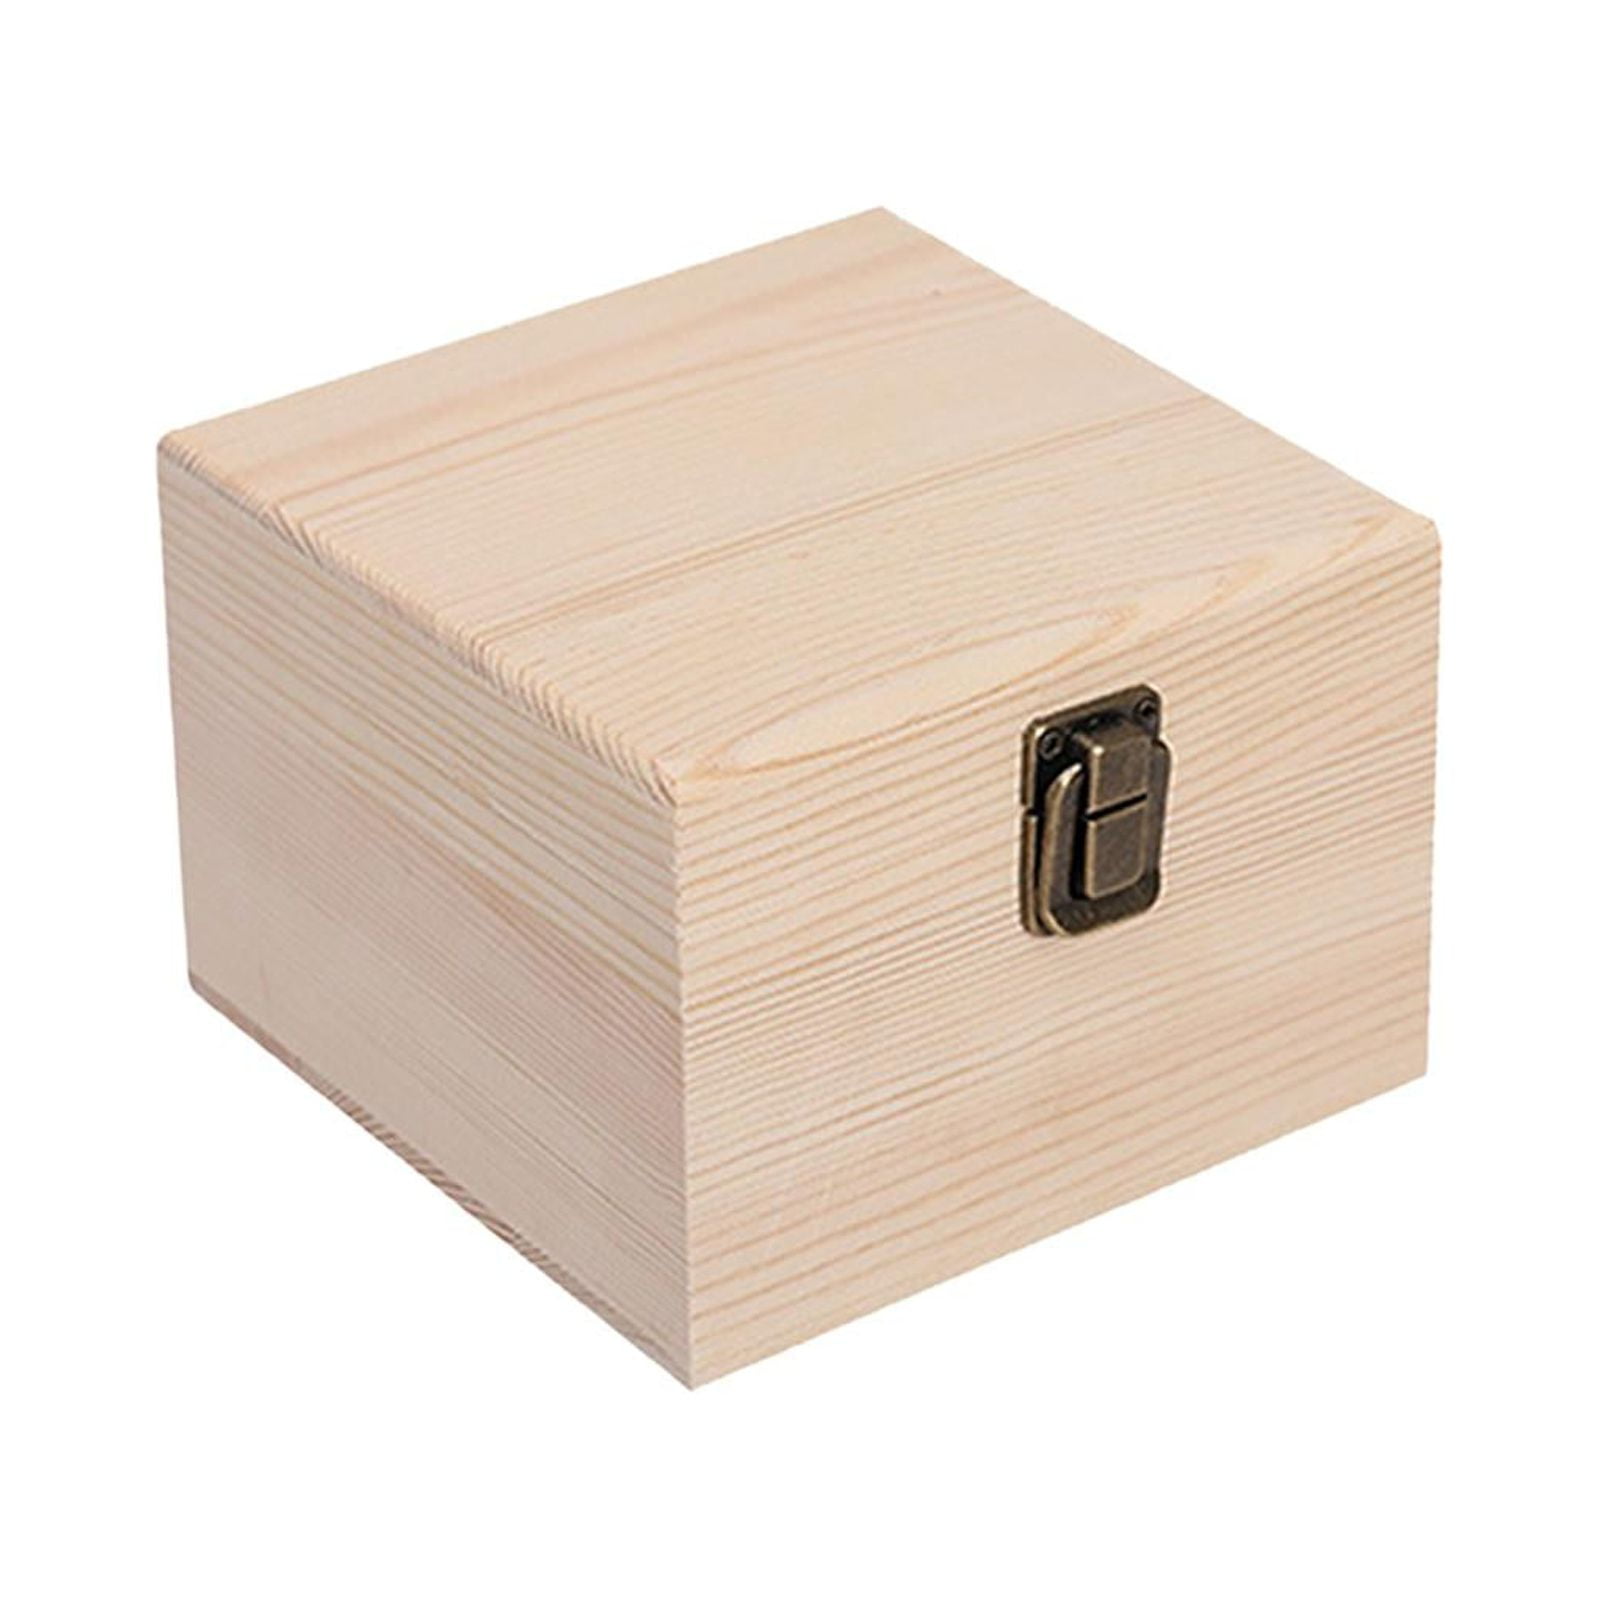 Wooden Box with Lid, Wood Storage Box ,Decorative Boxes with Lid